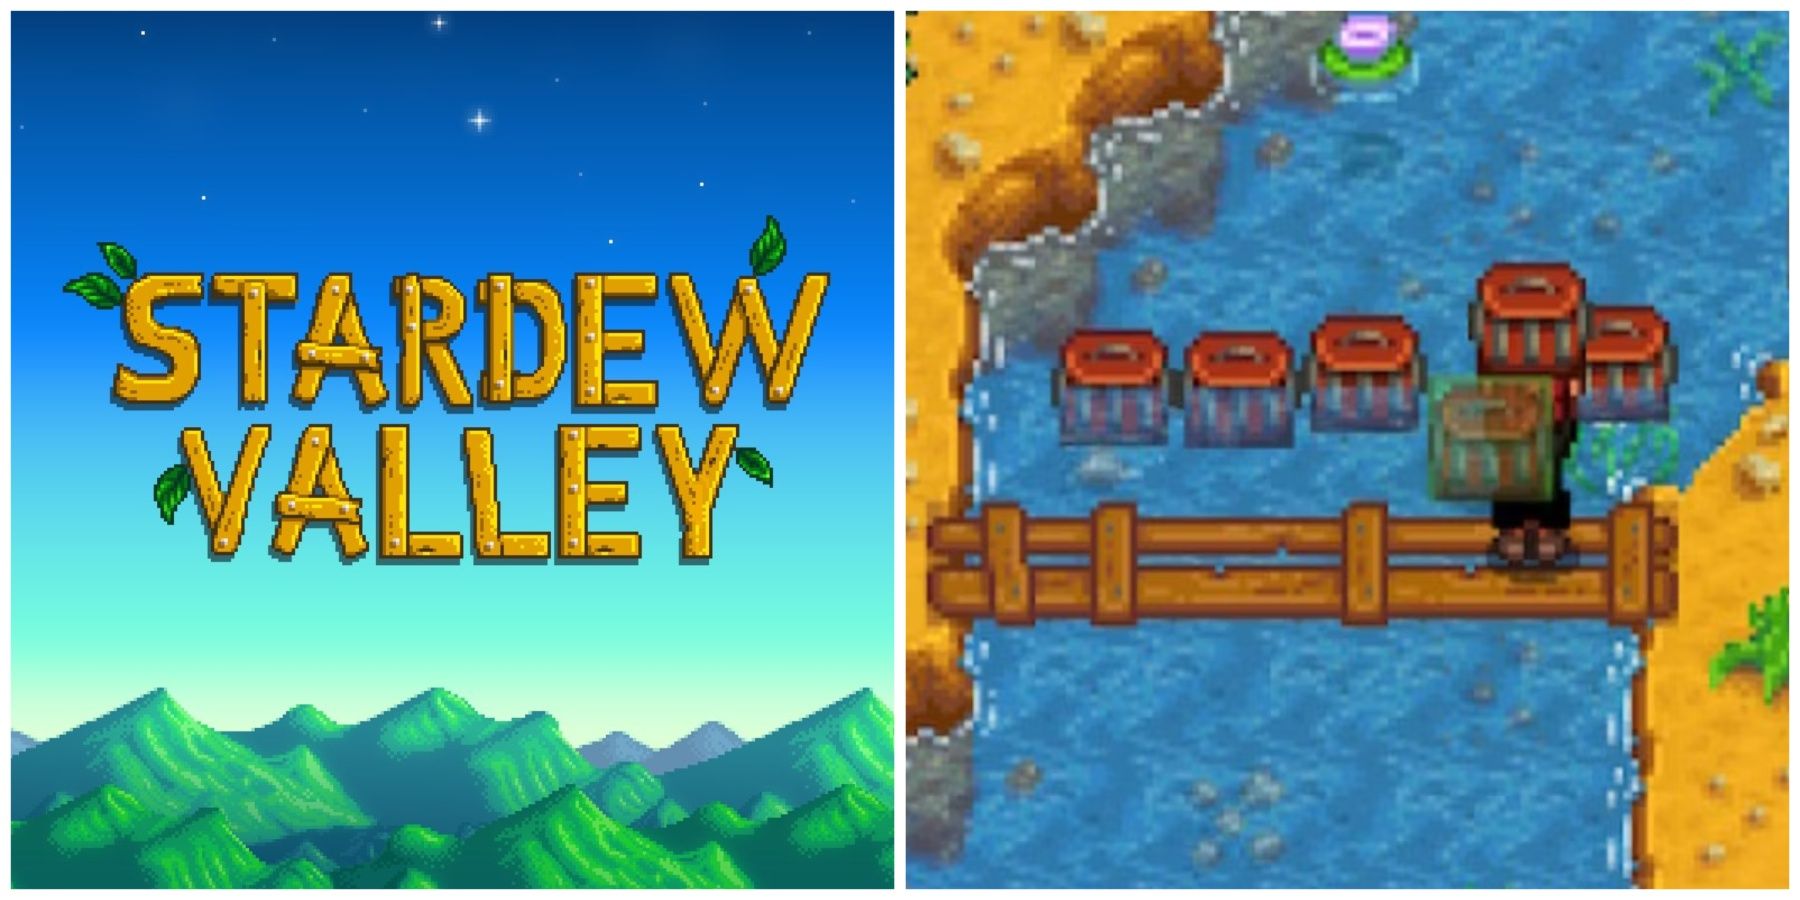 stardew valley promo image and placing crab pot on shore